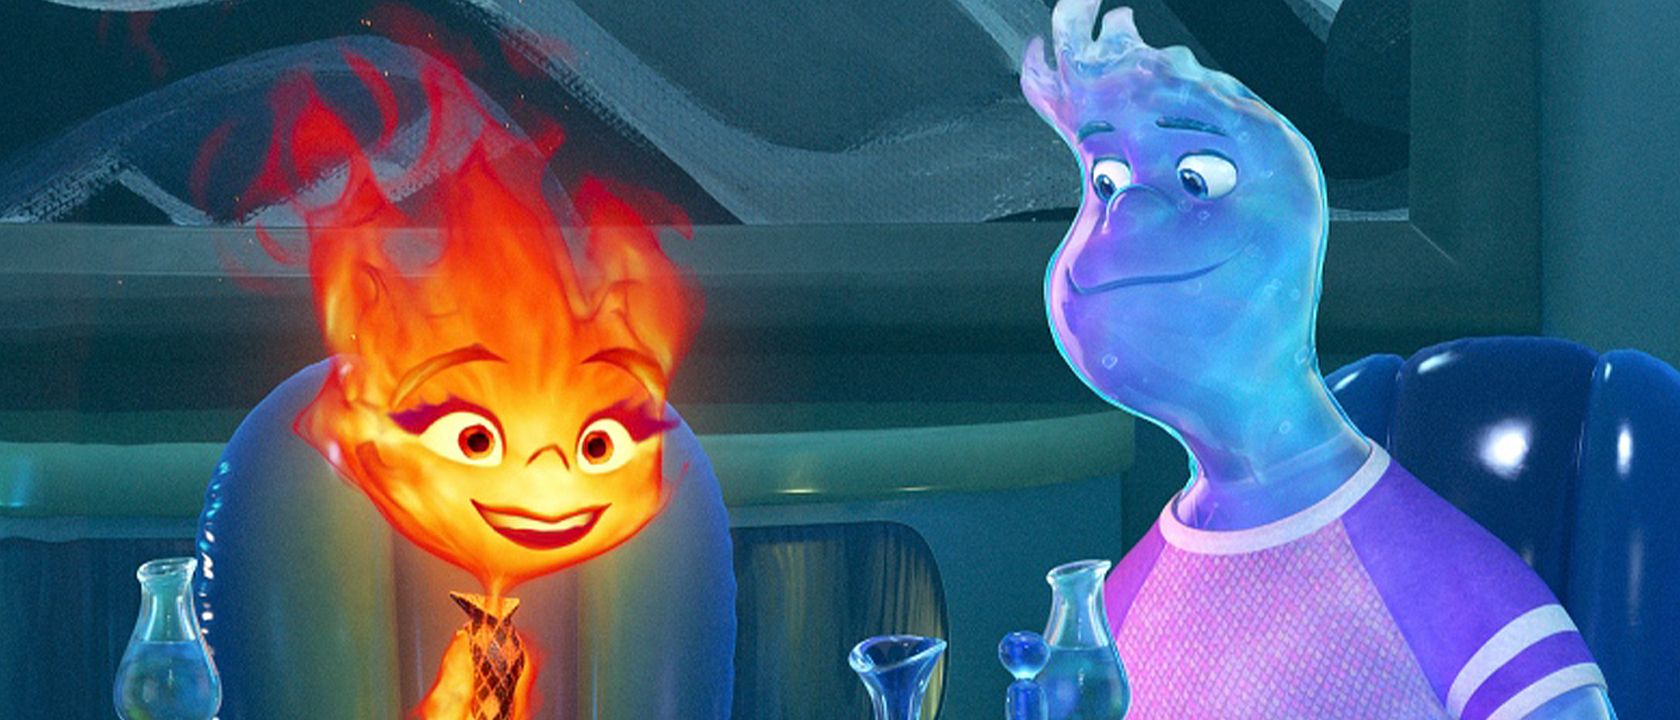 NEW FILM FROM PIXAR!! O IMPOSSIBLE LOVE BETWEEN FOGO AND WATER!! 🔥💧 